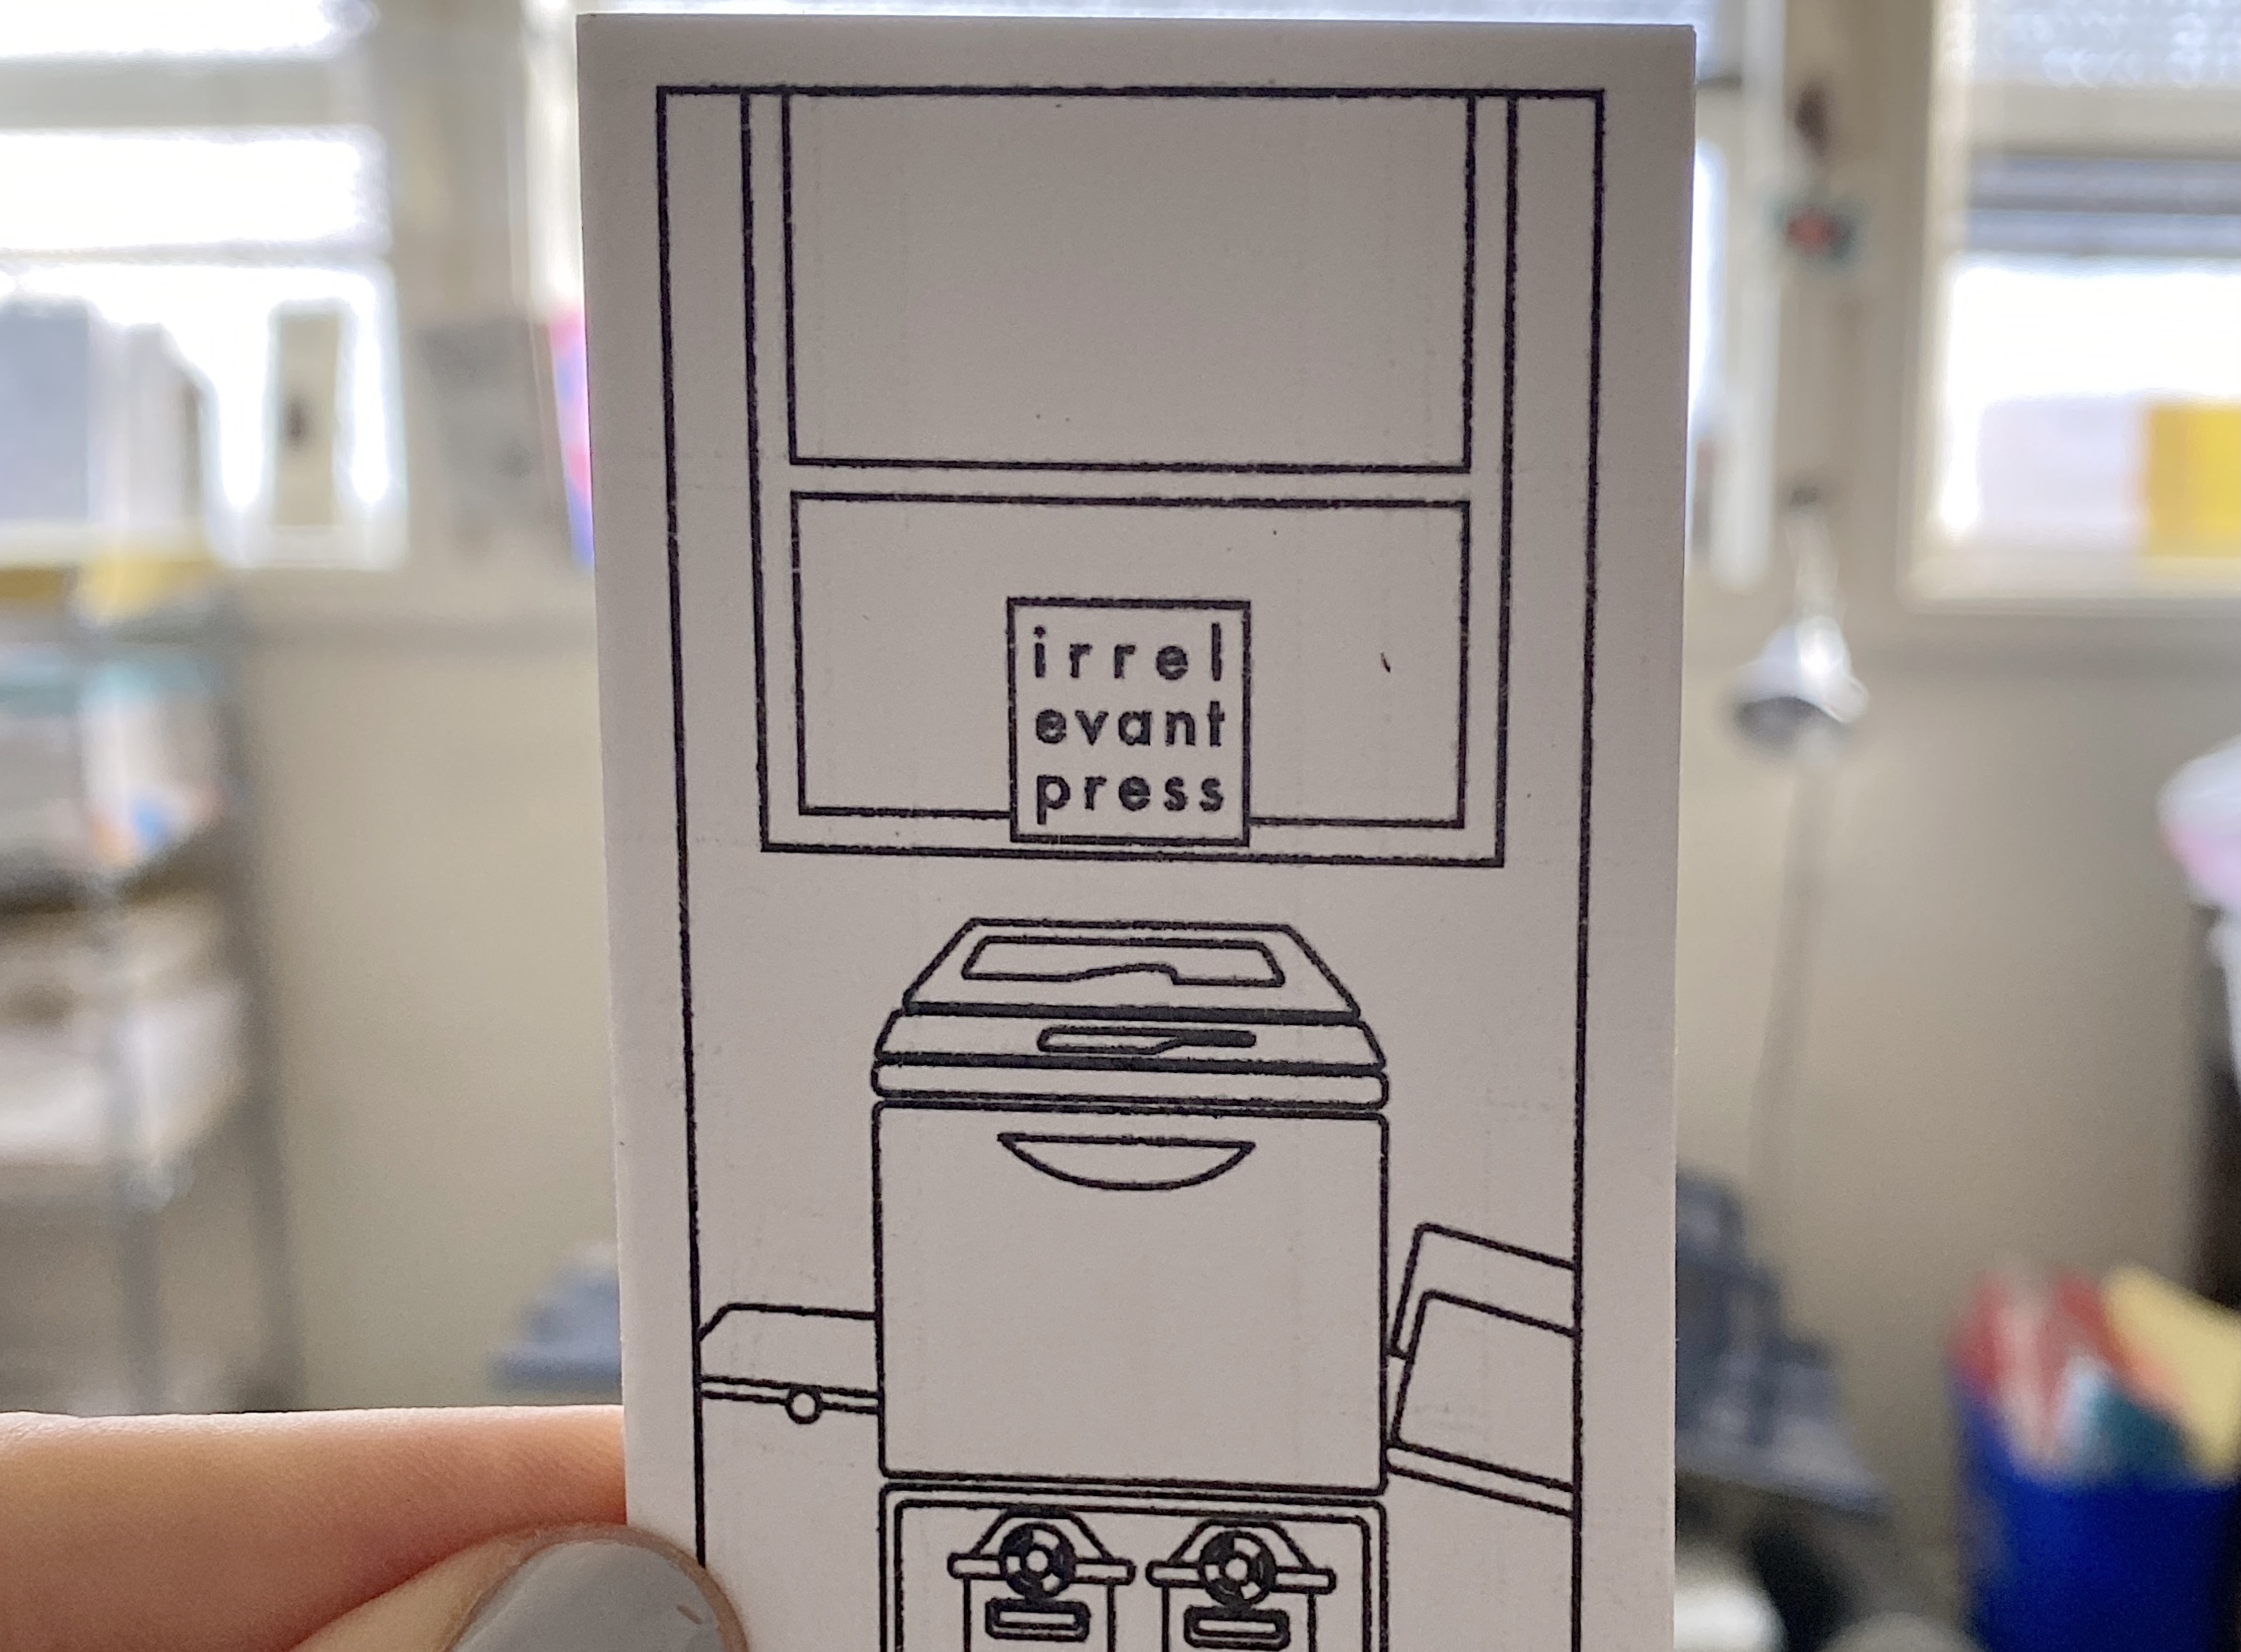 A hand holding up a rectangular piece of paper with a graphic design of a printer and a sign that reads "irrelevant press."